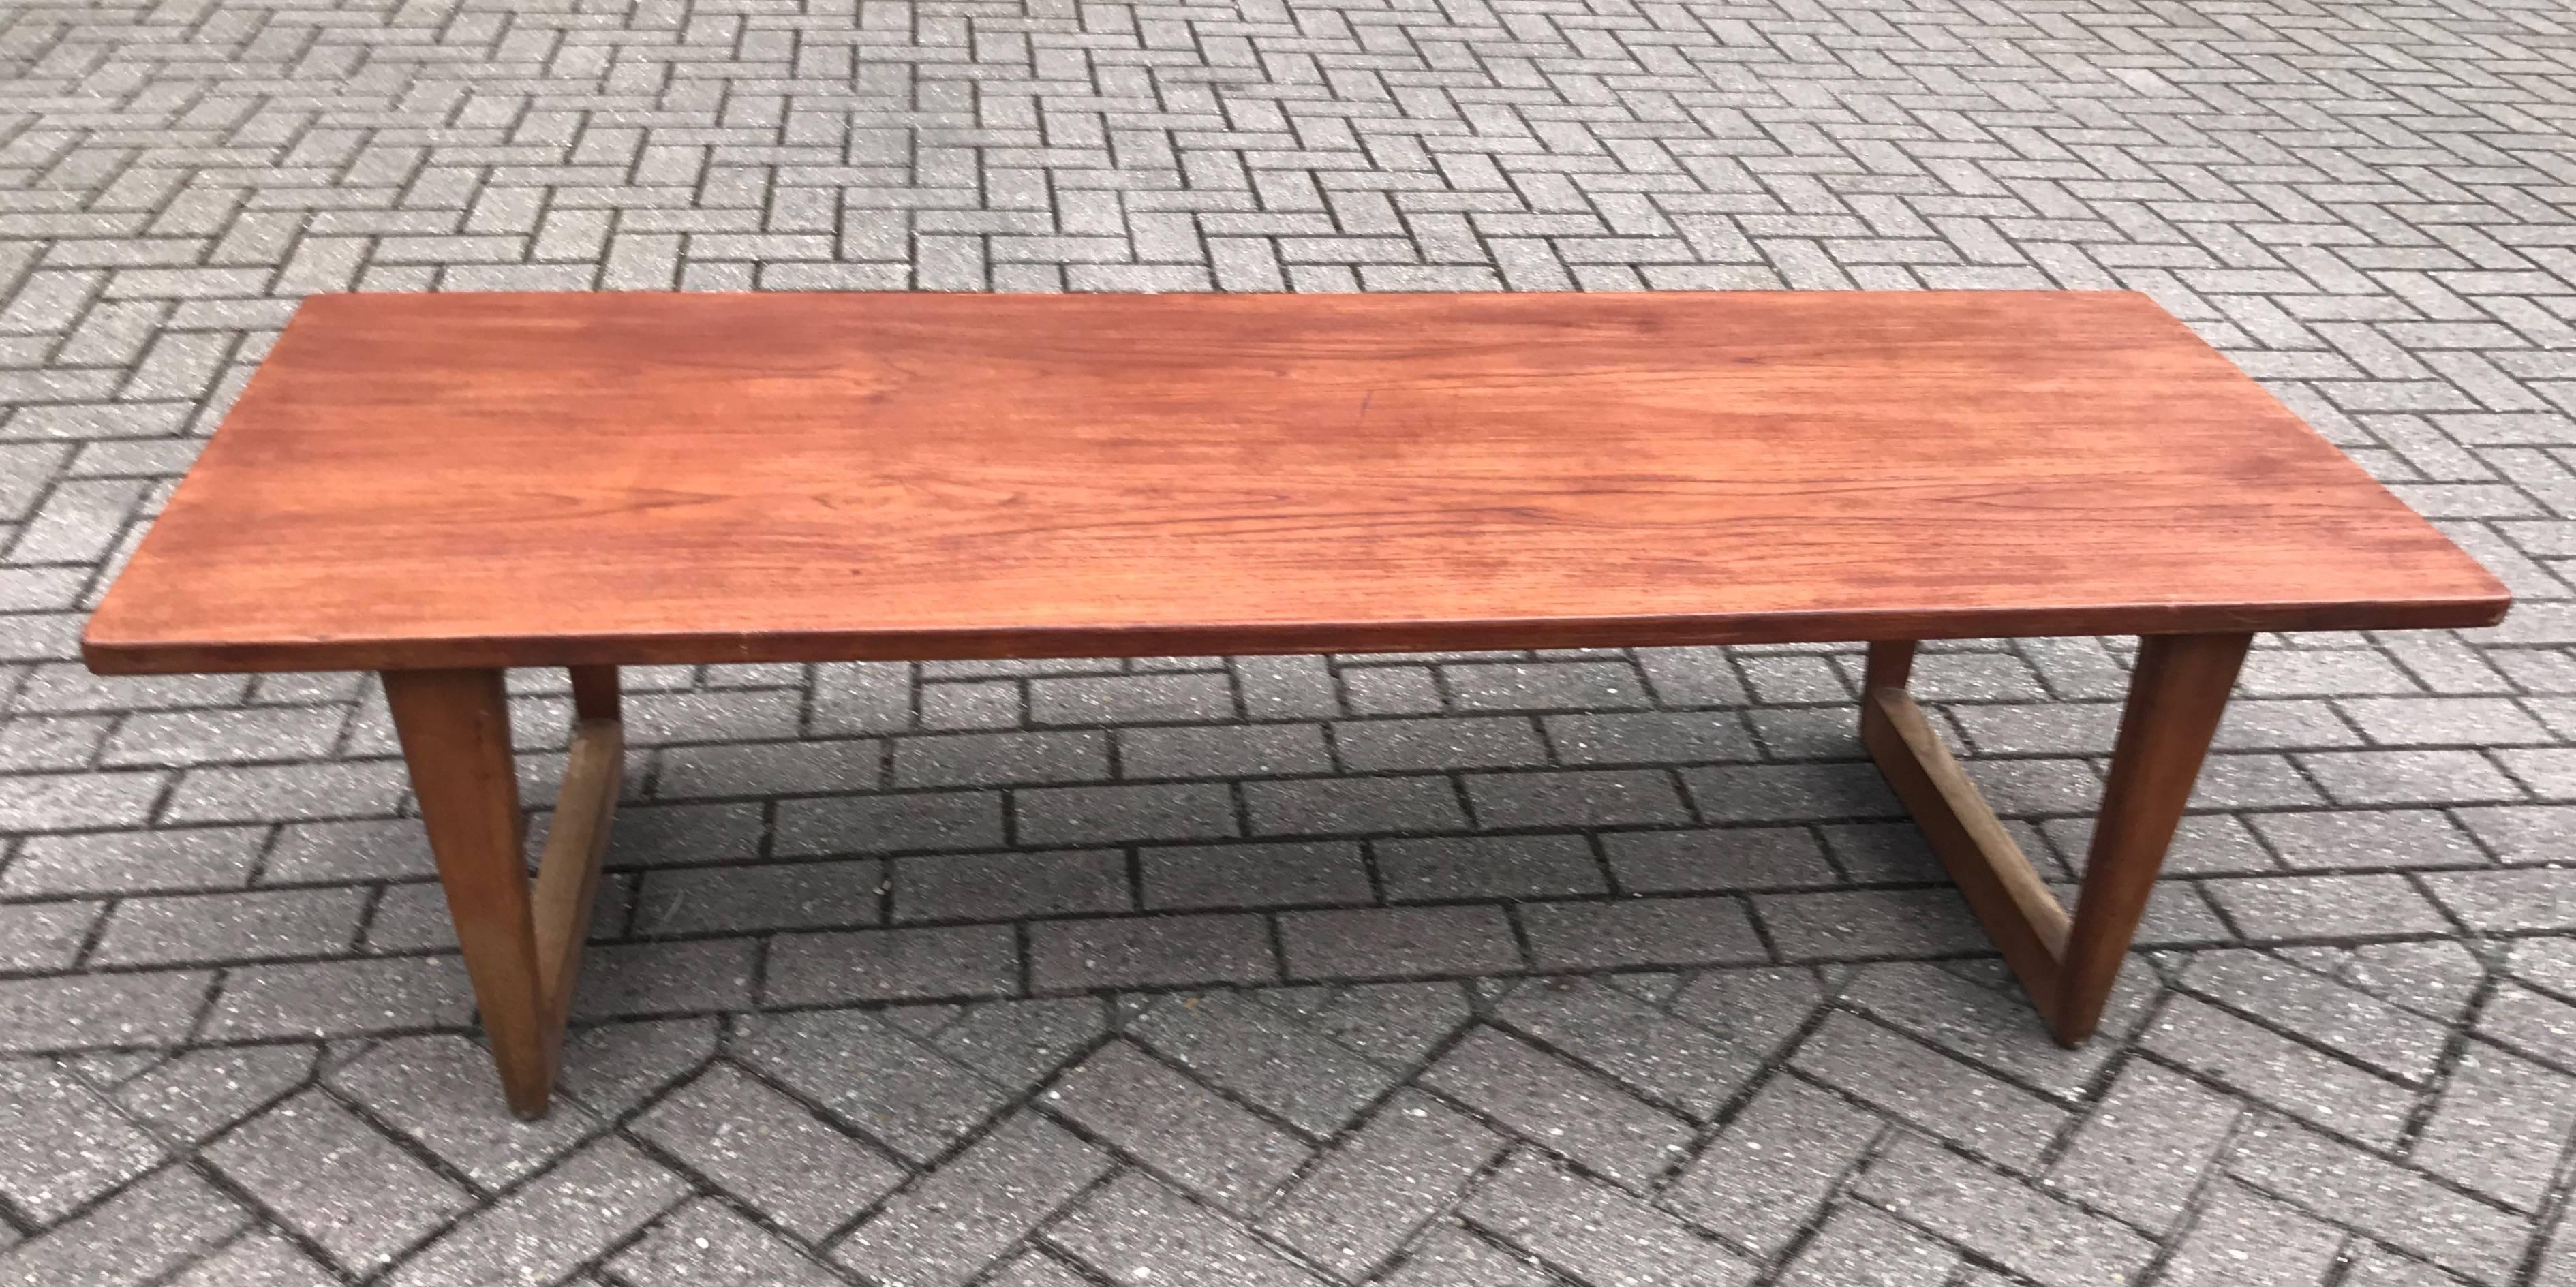 1956 design table by Børge Mogensen, manufactured by Fredericia Stolefabrik.

This vintage Scandinavian table is beautiful in design, in great condition and it can be used for all kinds of purposes. The most logic would be to use it like most